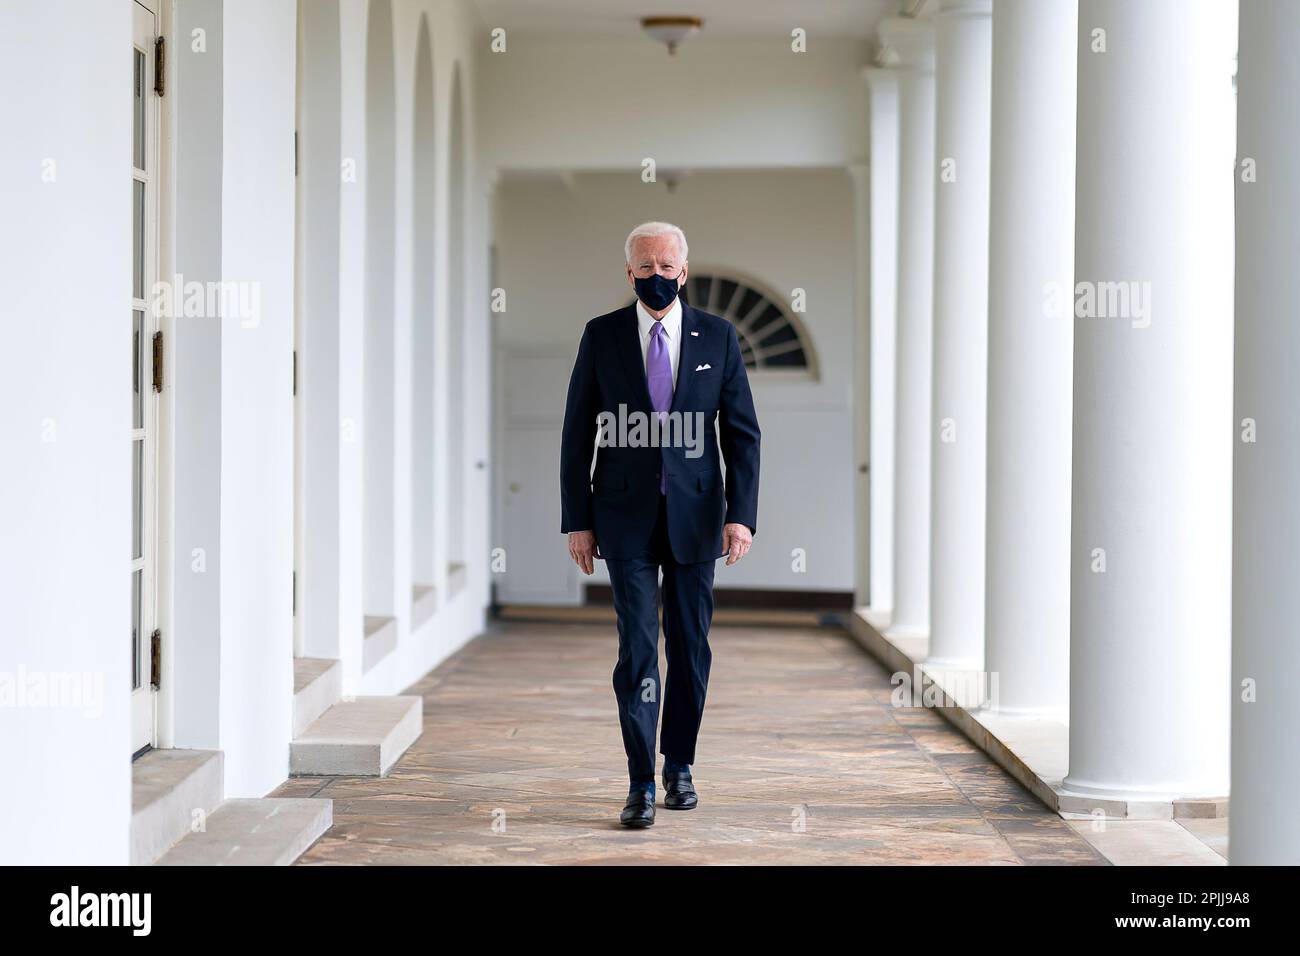 P20210121AS-0485: President Joe Biden walks along the Colonnade Thursday, Jan. 21, 2021, to the Oval Office of the White House. (Official White House Photo by Adam Schultz) Stock Photo